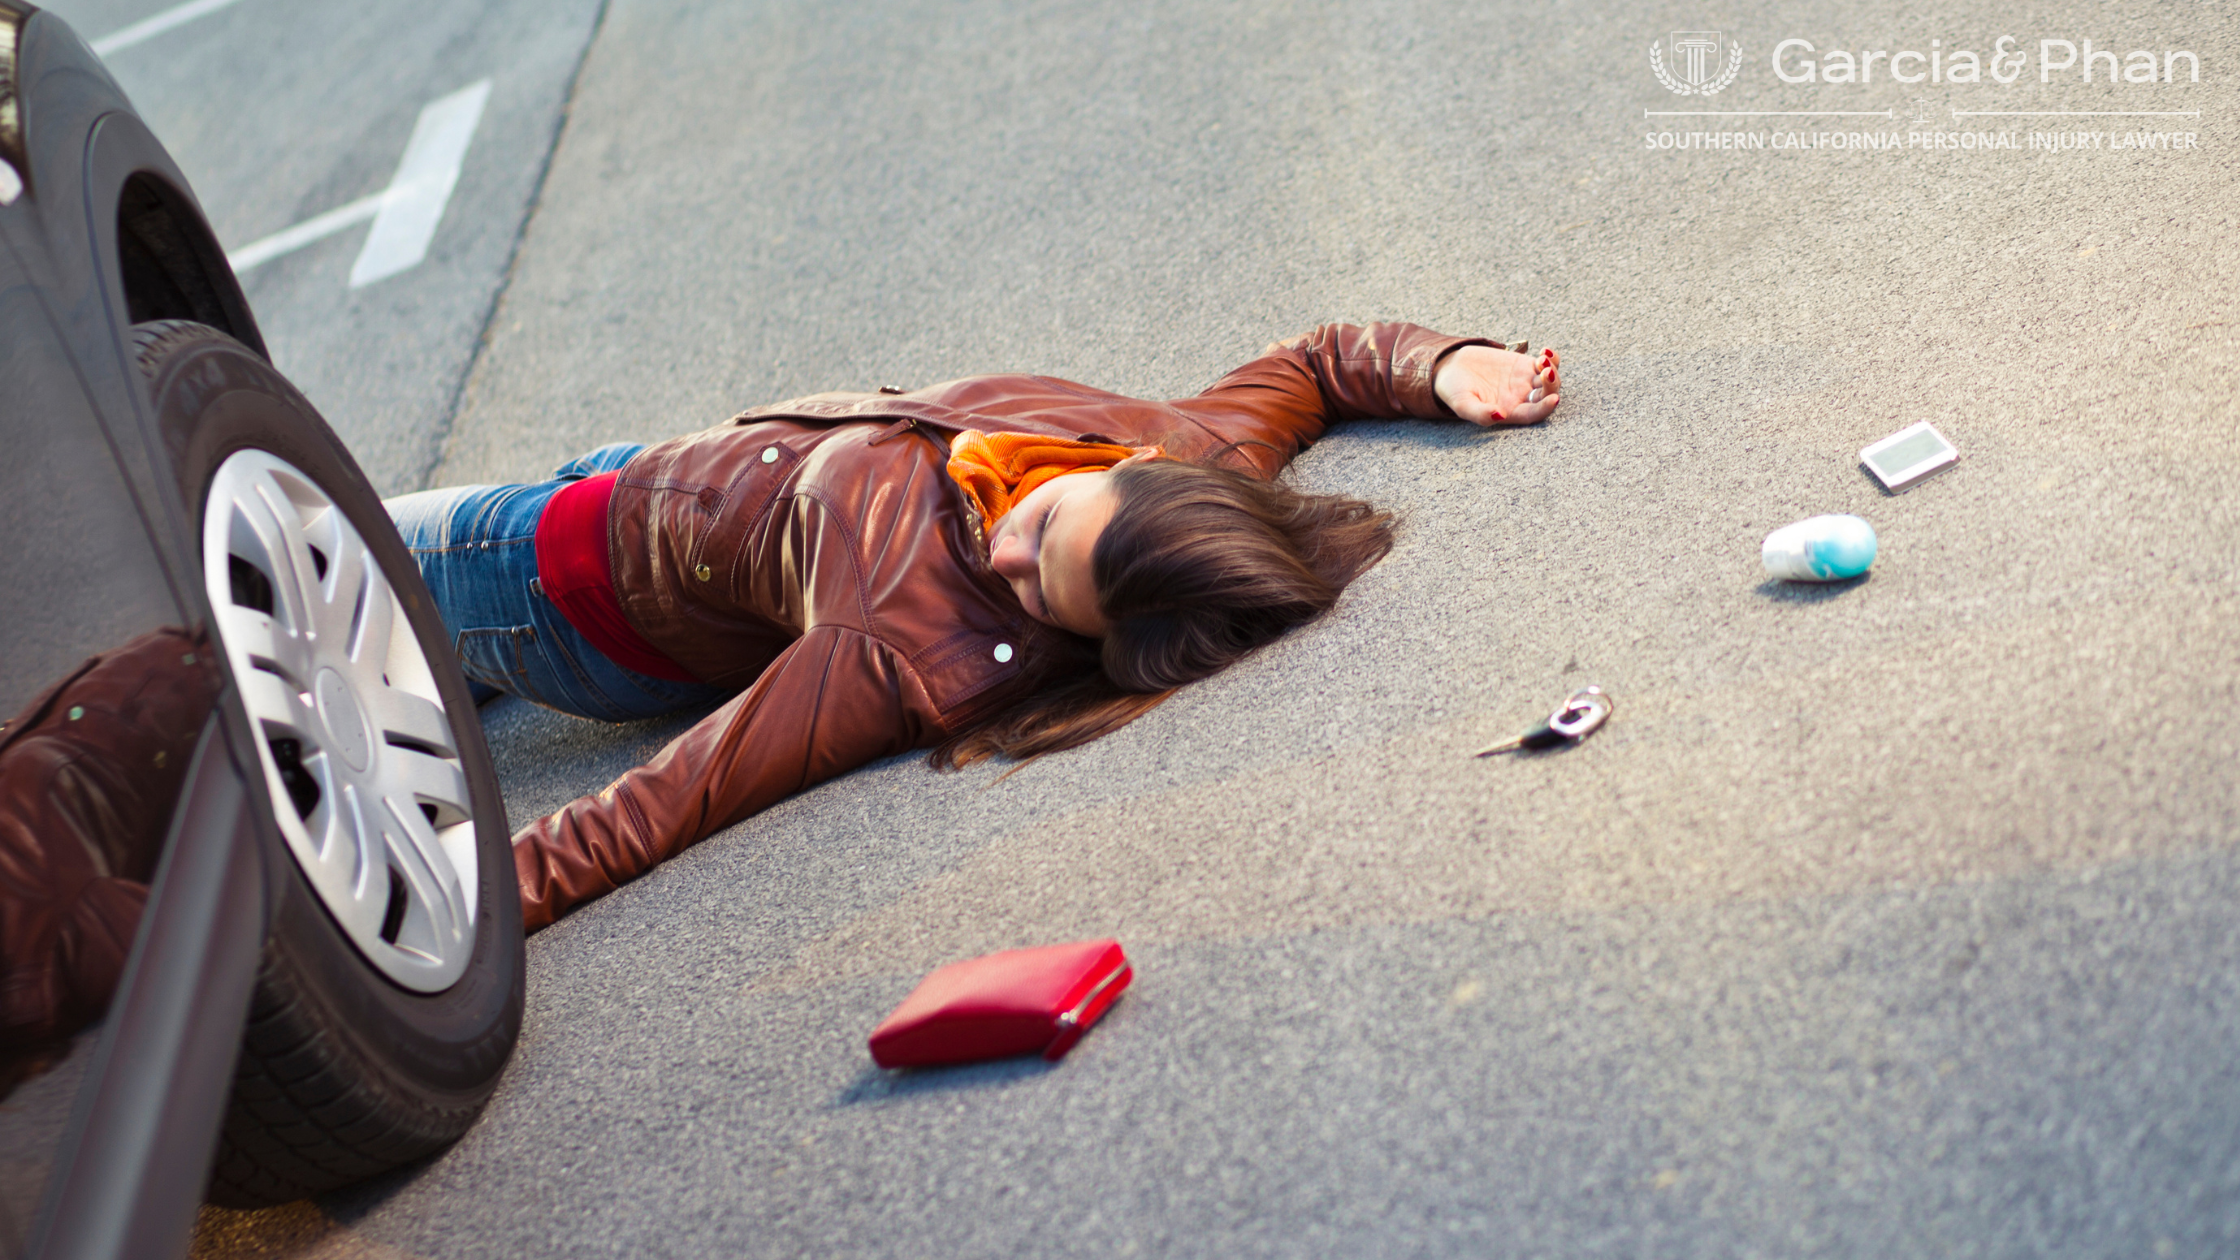 Know About California's Rising Pedestrian Accidents | GP